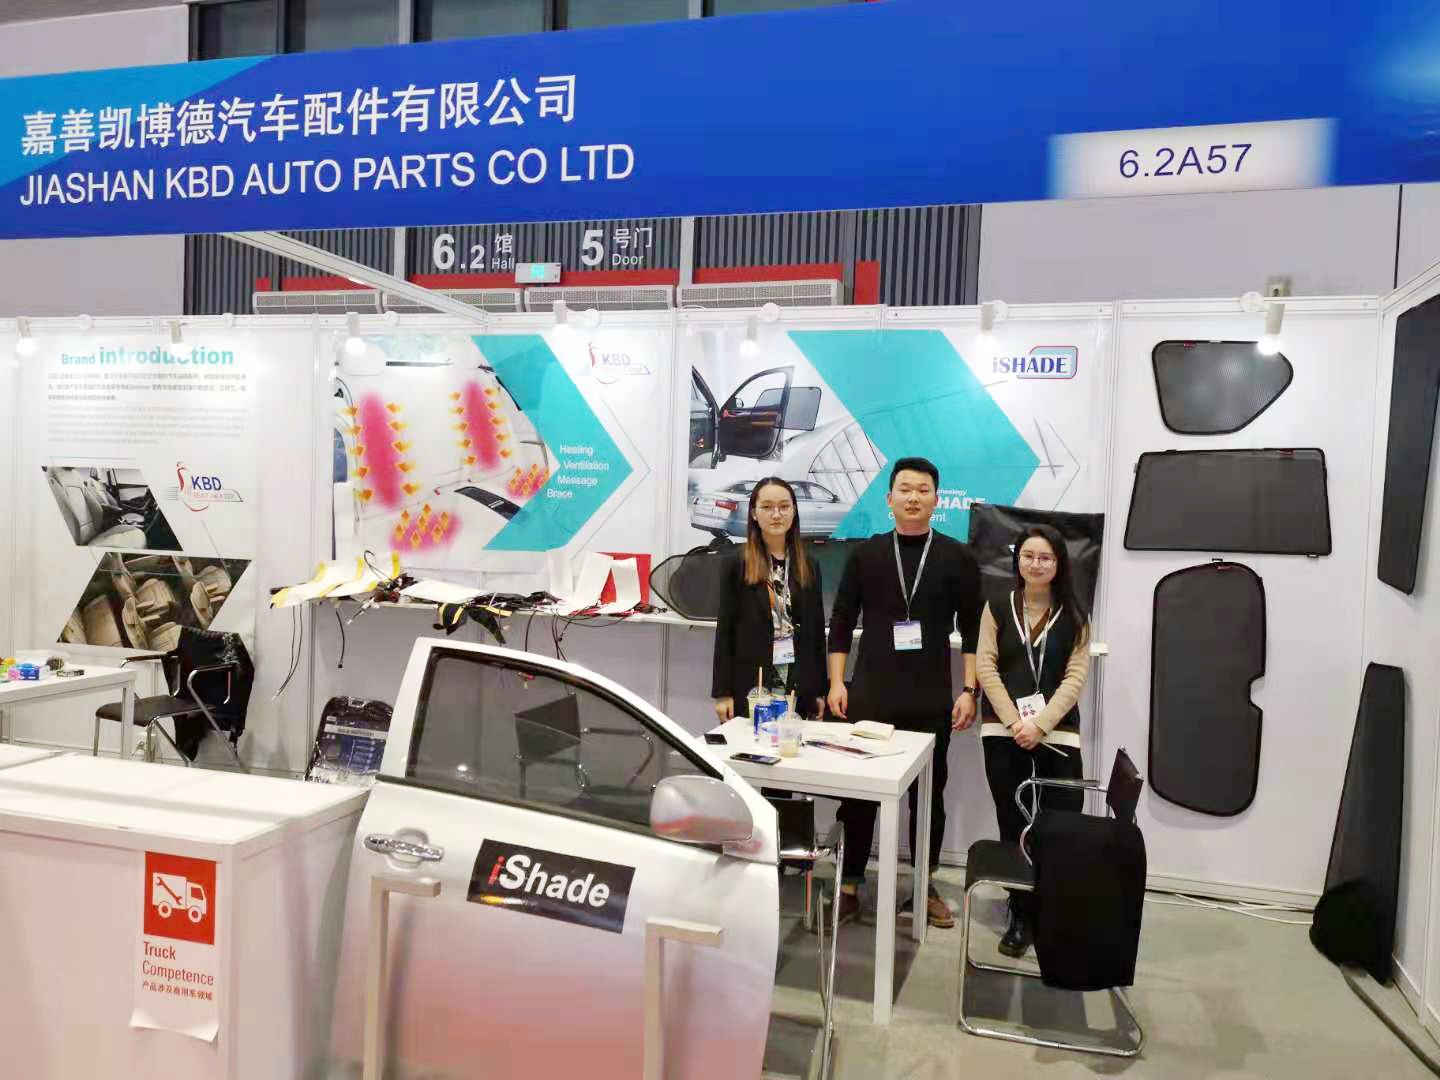 JIAXING XIAOHE AUTO PARTS CO.,LTD to participate in the Frankfurt International auto parts exhibition, sunshade by the major OEM love.